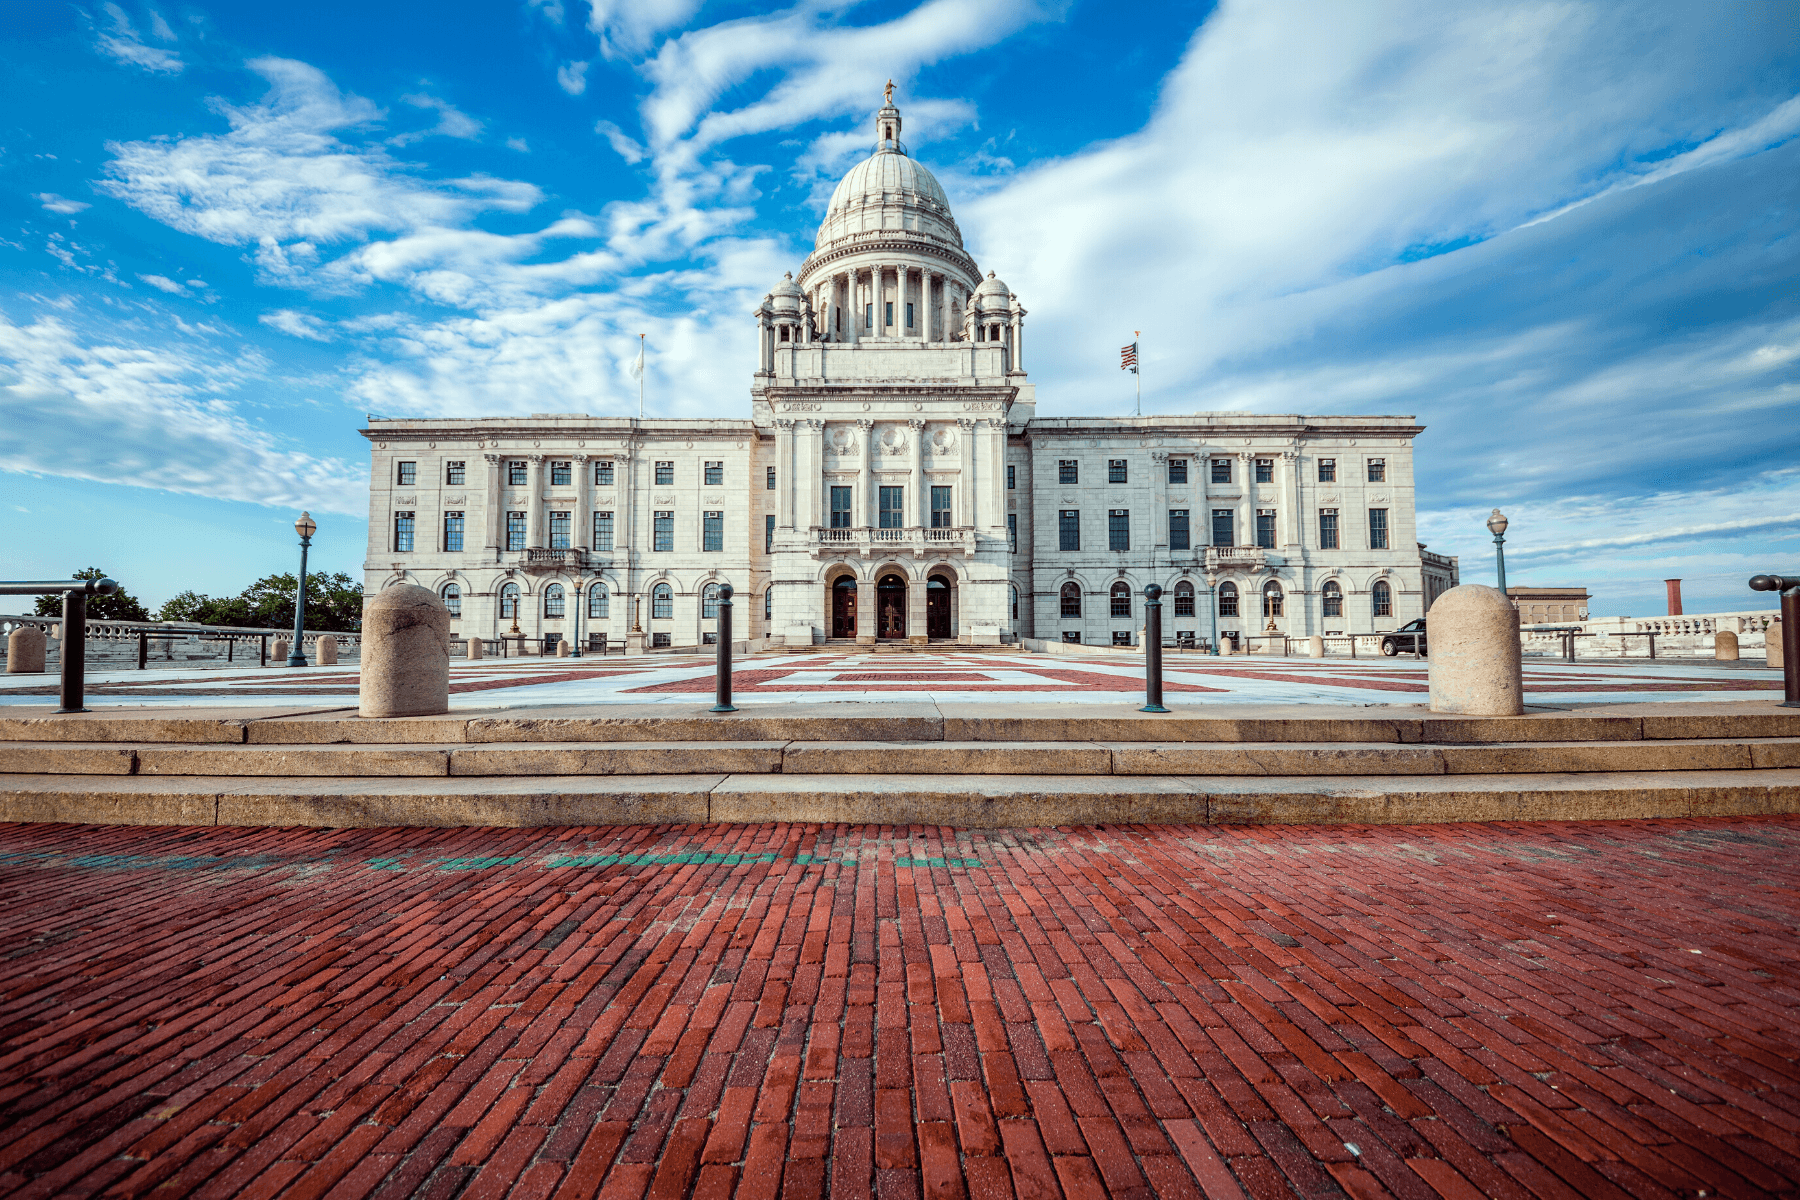 https://res.cloudinary.com/see-sight-tours/image/upload/v1581436378/rhode-island-state-house-front.png